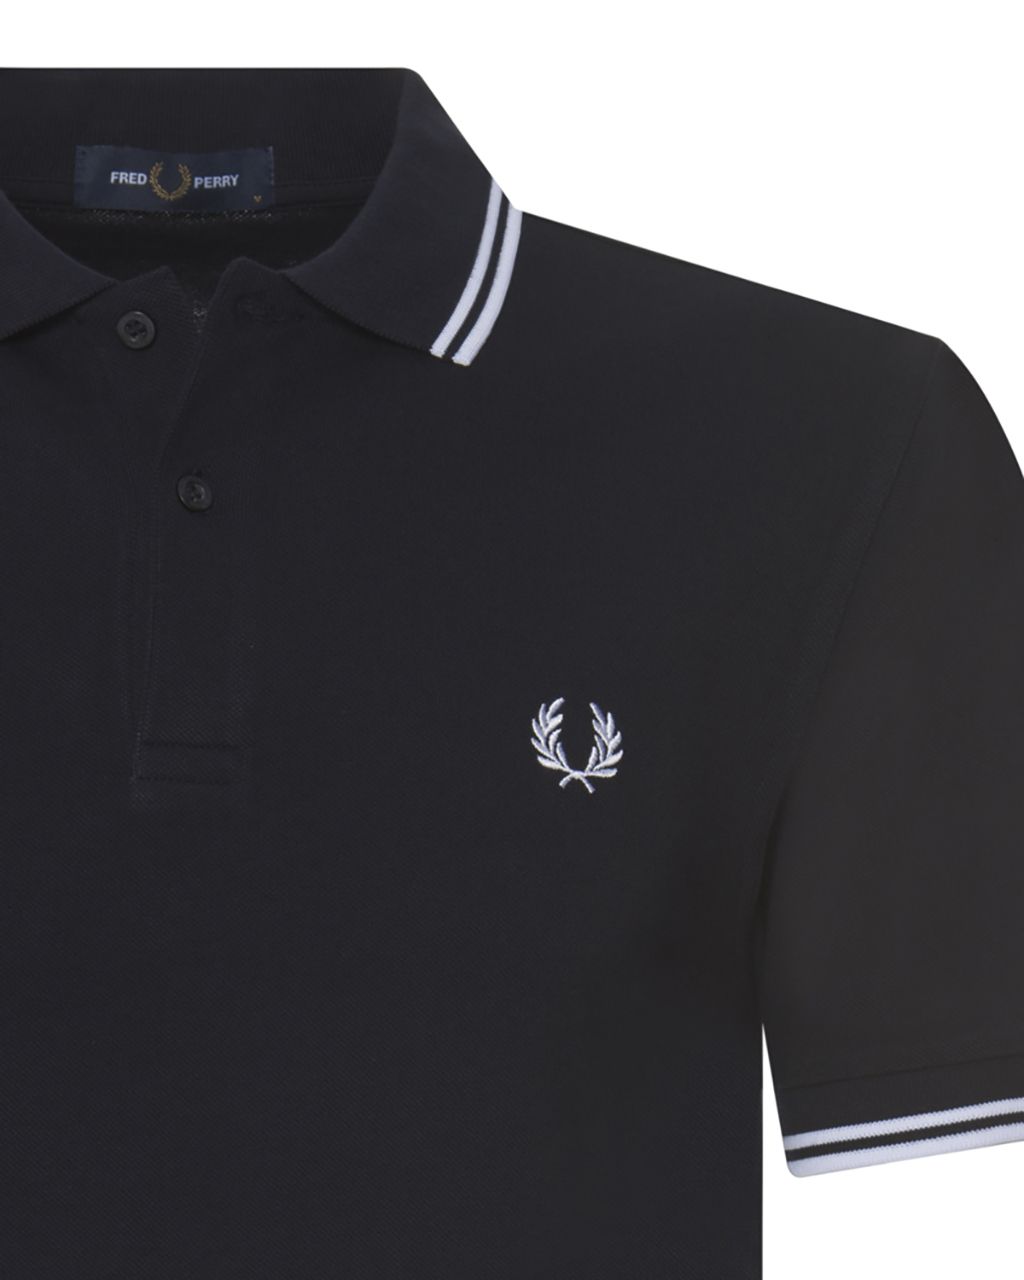 Fred Perry Polo KM Donker blauw 070163-001-L